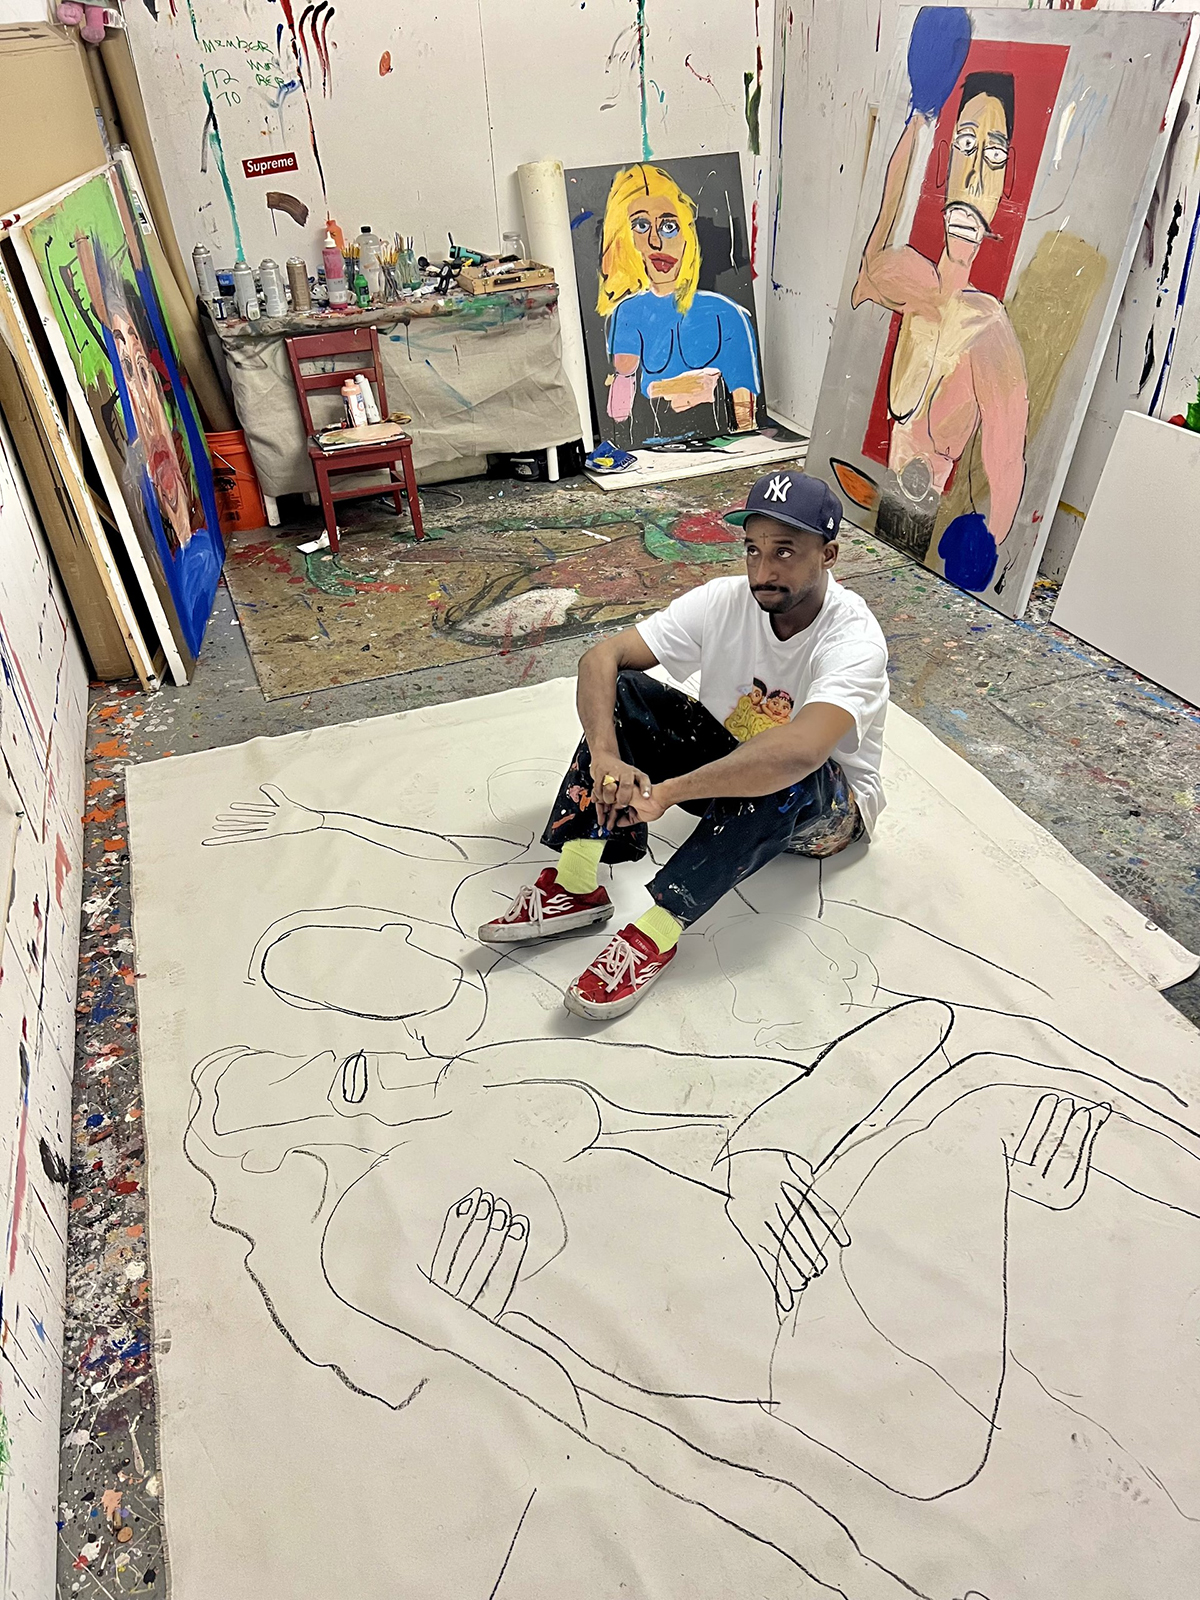 A man wearing a white t shirt sitting on an art work on the floor in a studio